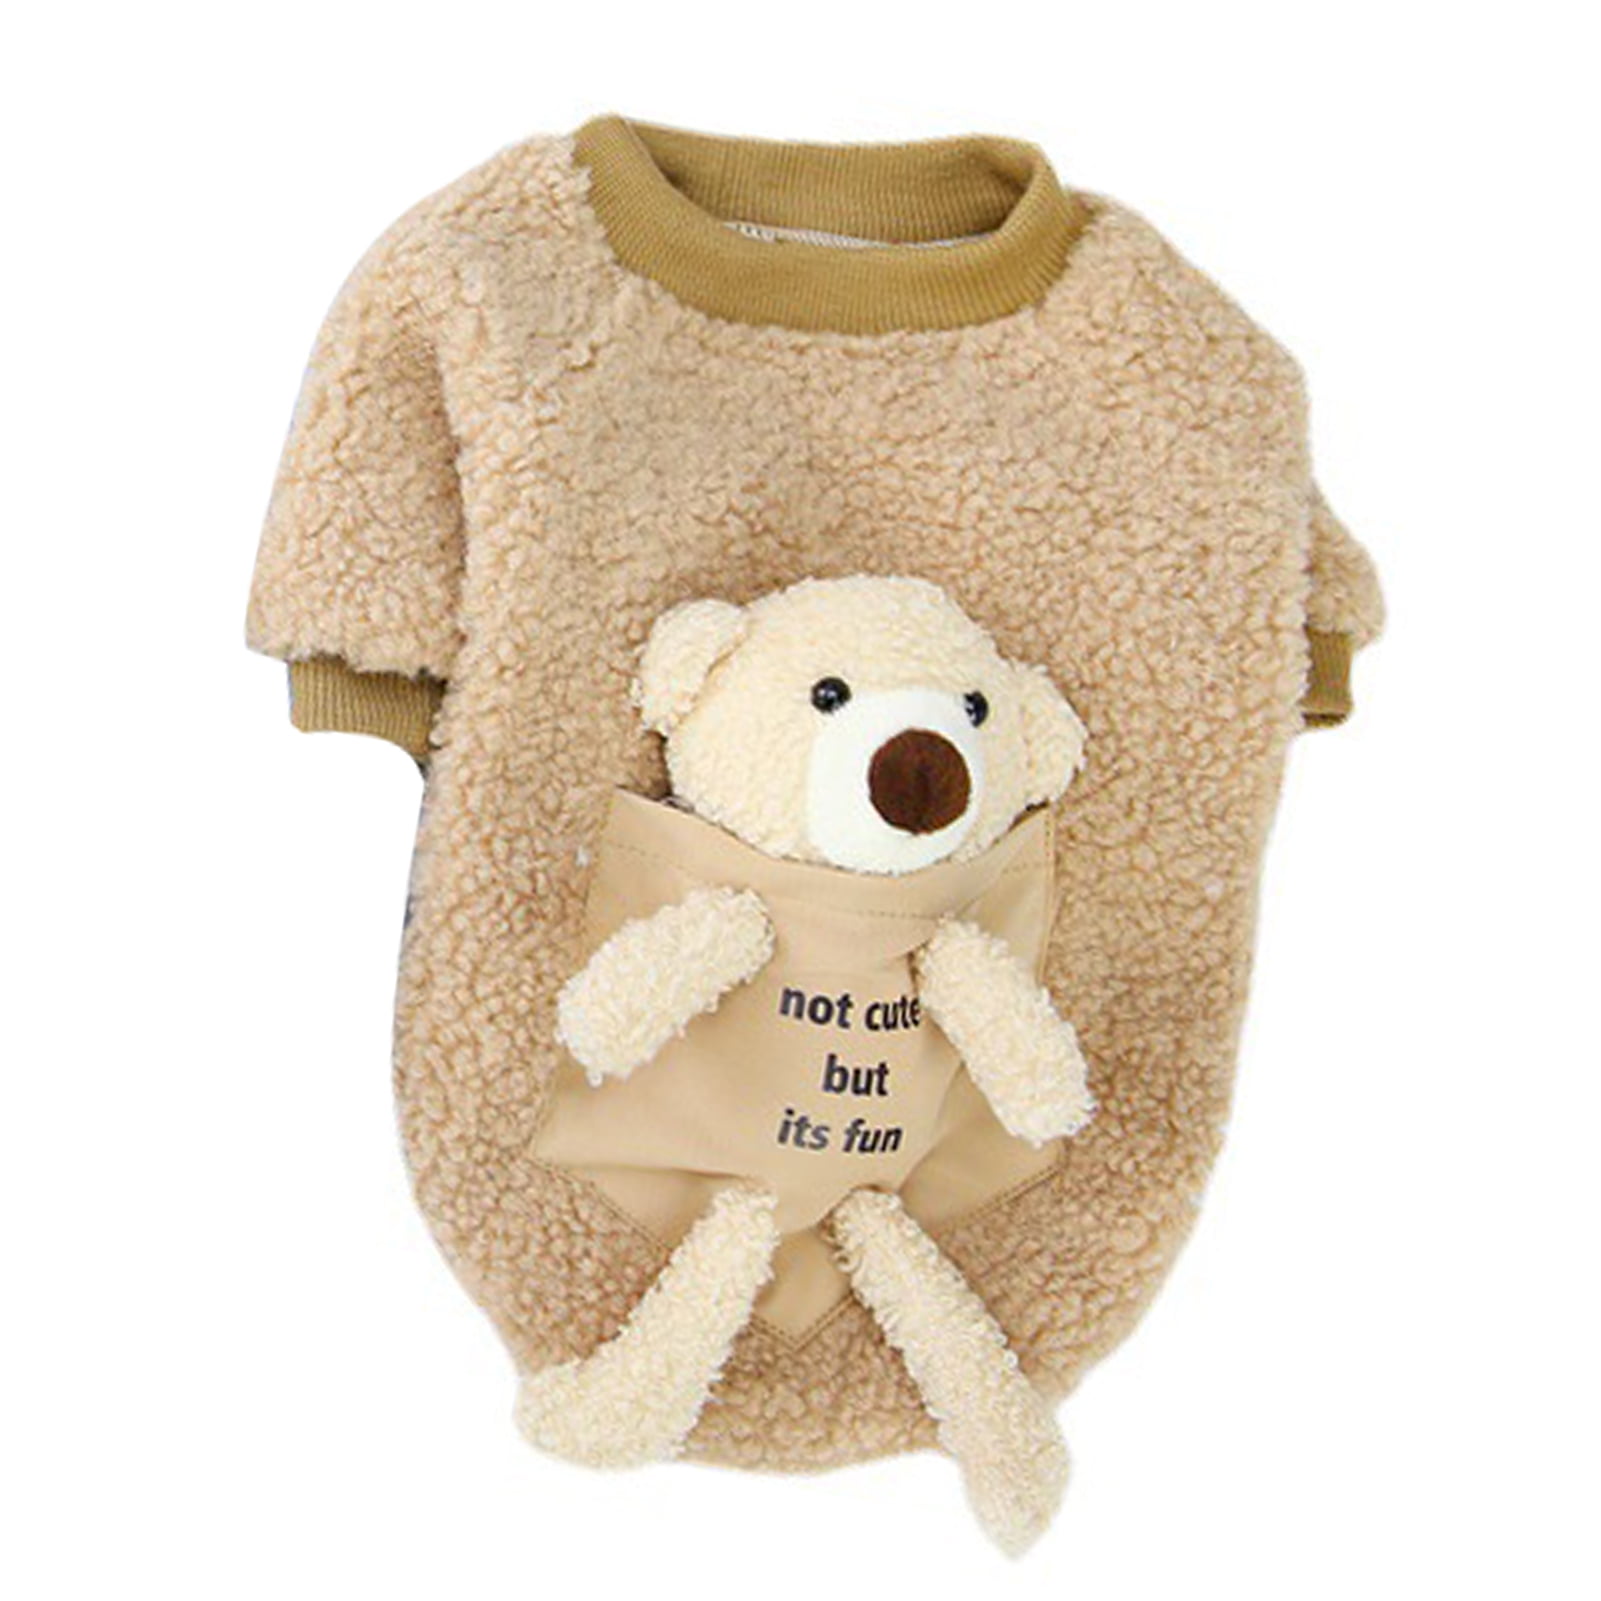 16"/40cm TEDDY BEAR CLOTHES HOODIE BUILD A TEDDY BEAR pink,blue,red,white 